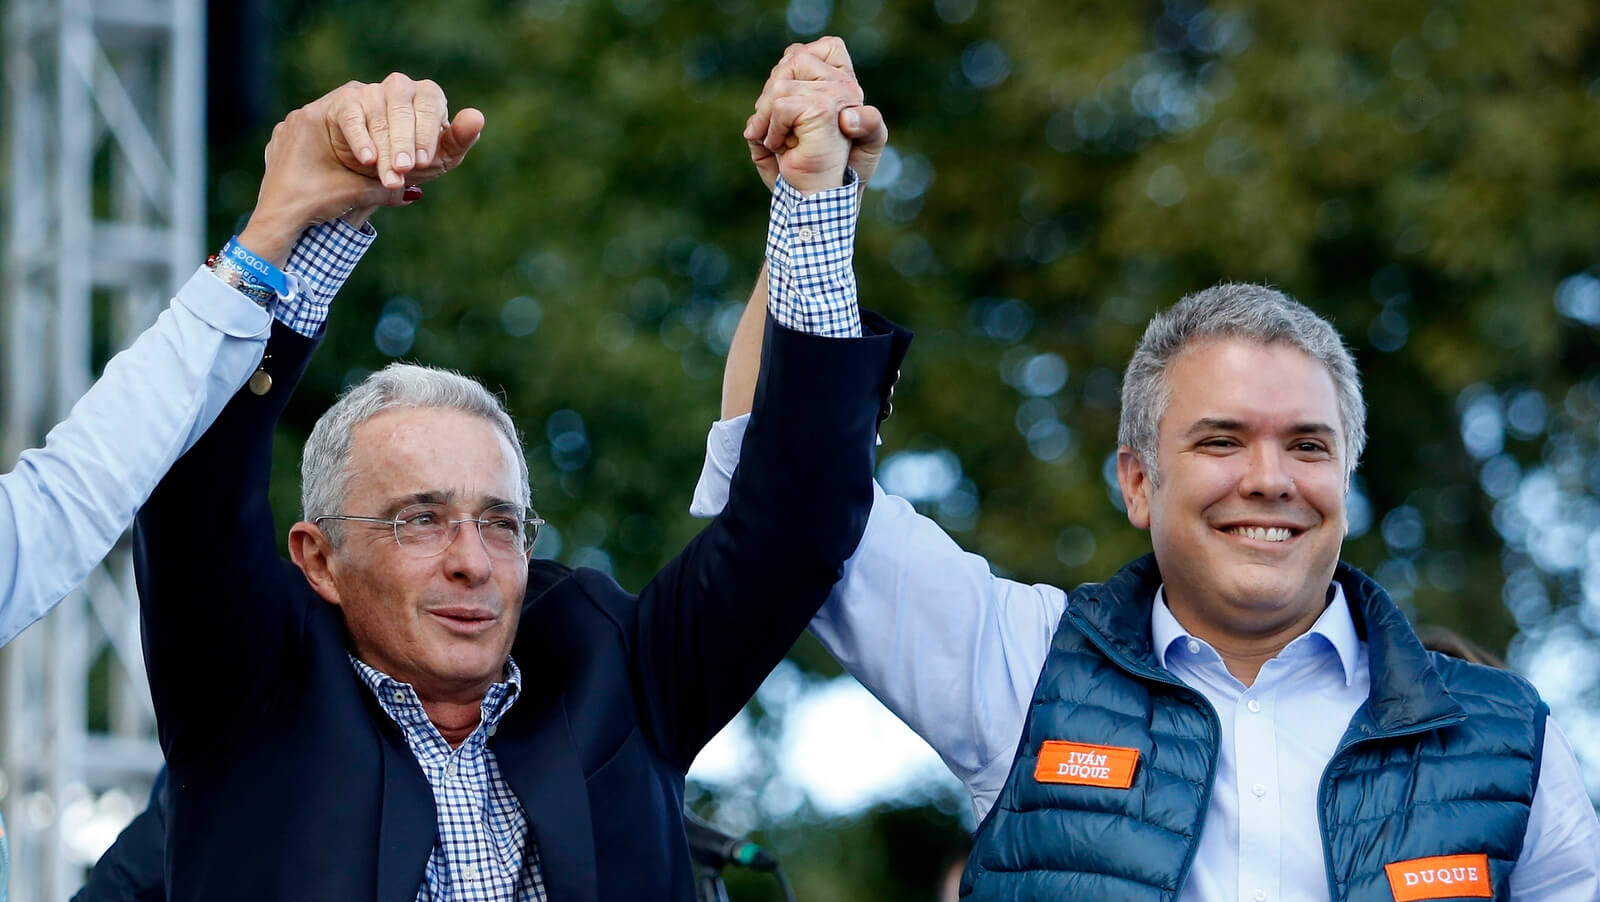 Ivan Duque and former President Alvaro Uribe raise their hands during a campaign rally in Bogota, Colombia, May 20, 2018. Fernando Vergara | AP